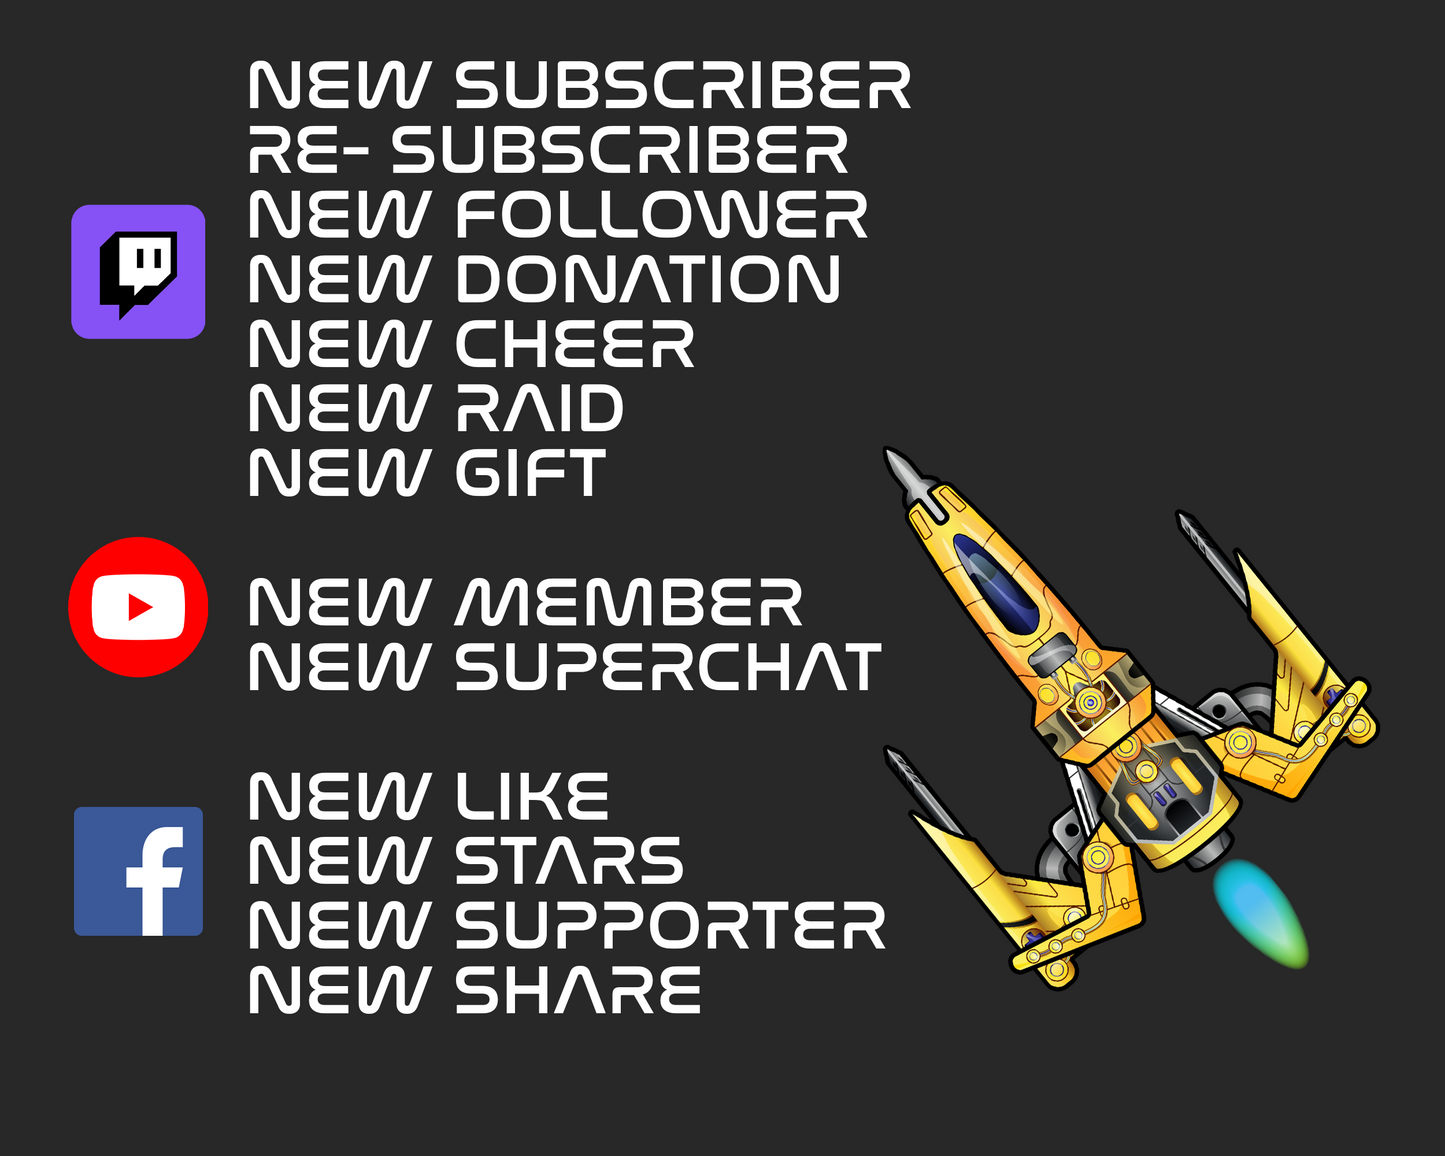 Retro Space Shooter Twitch Stream Alerts